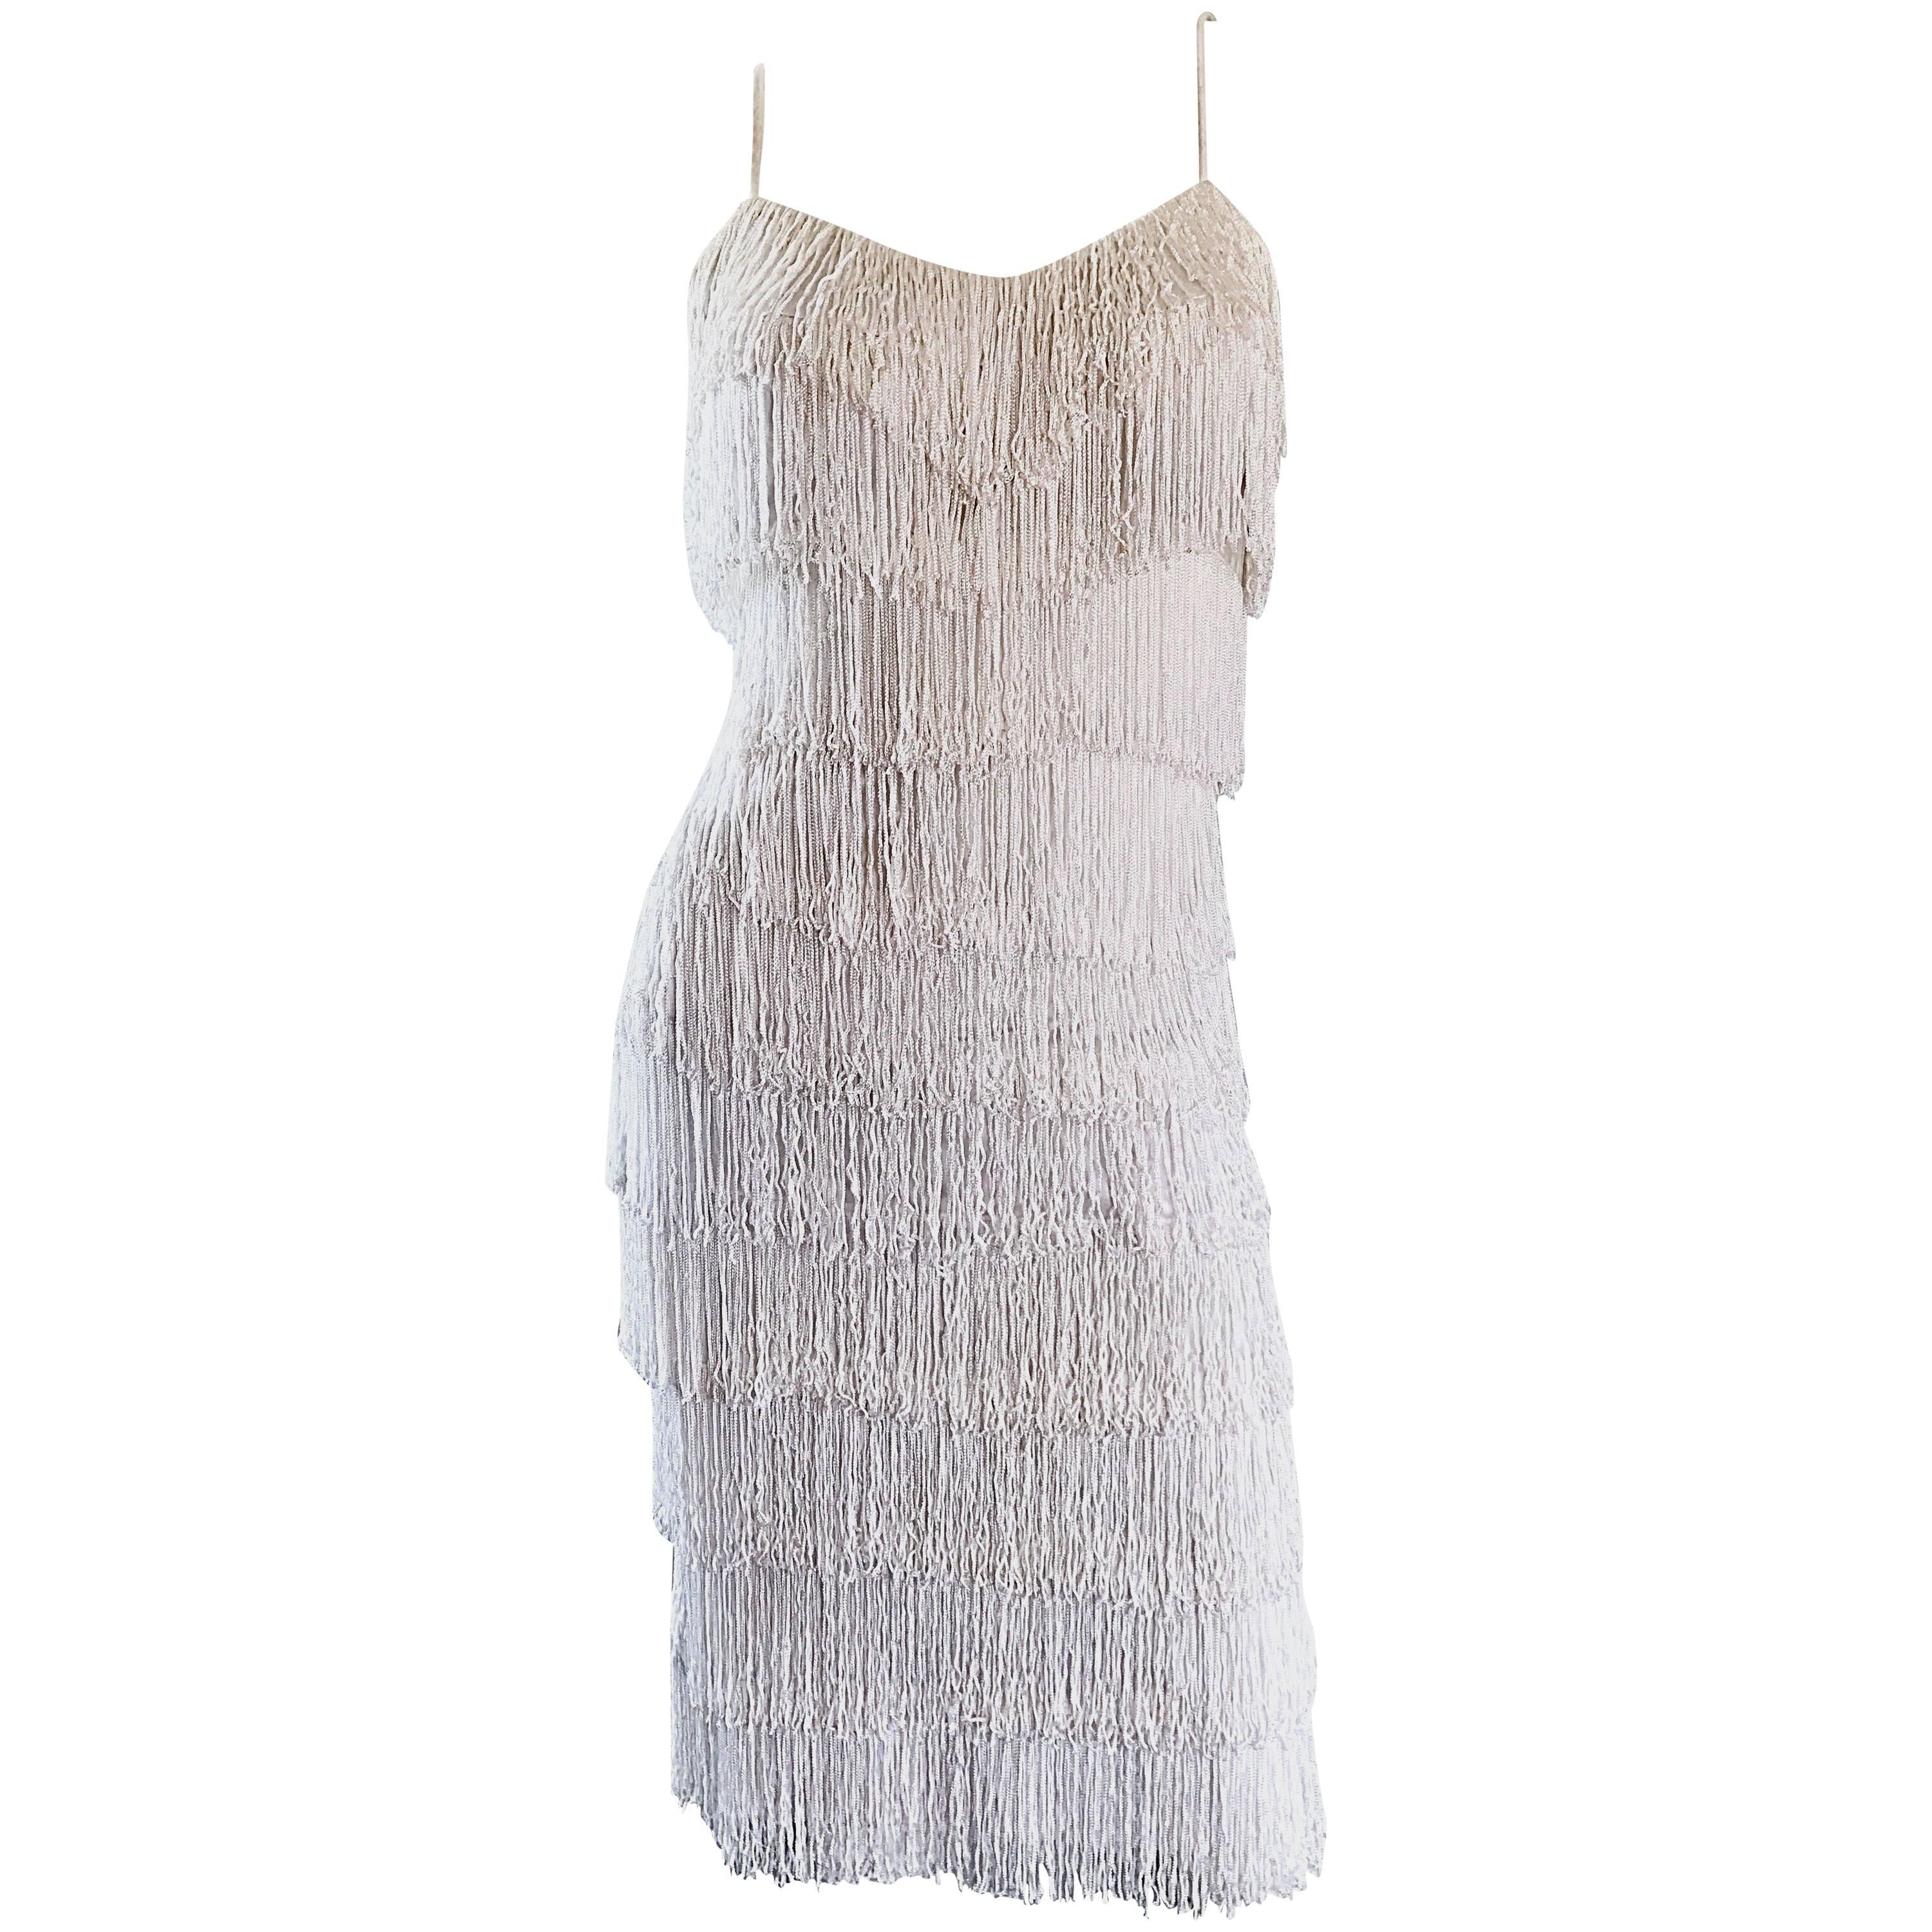 Incredible Vintage 1970s Does 1920s White Fully Fringed Jersey Flapper Dress